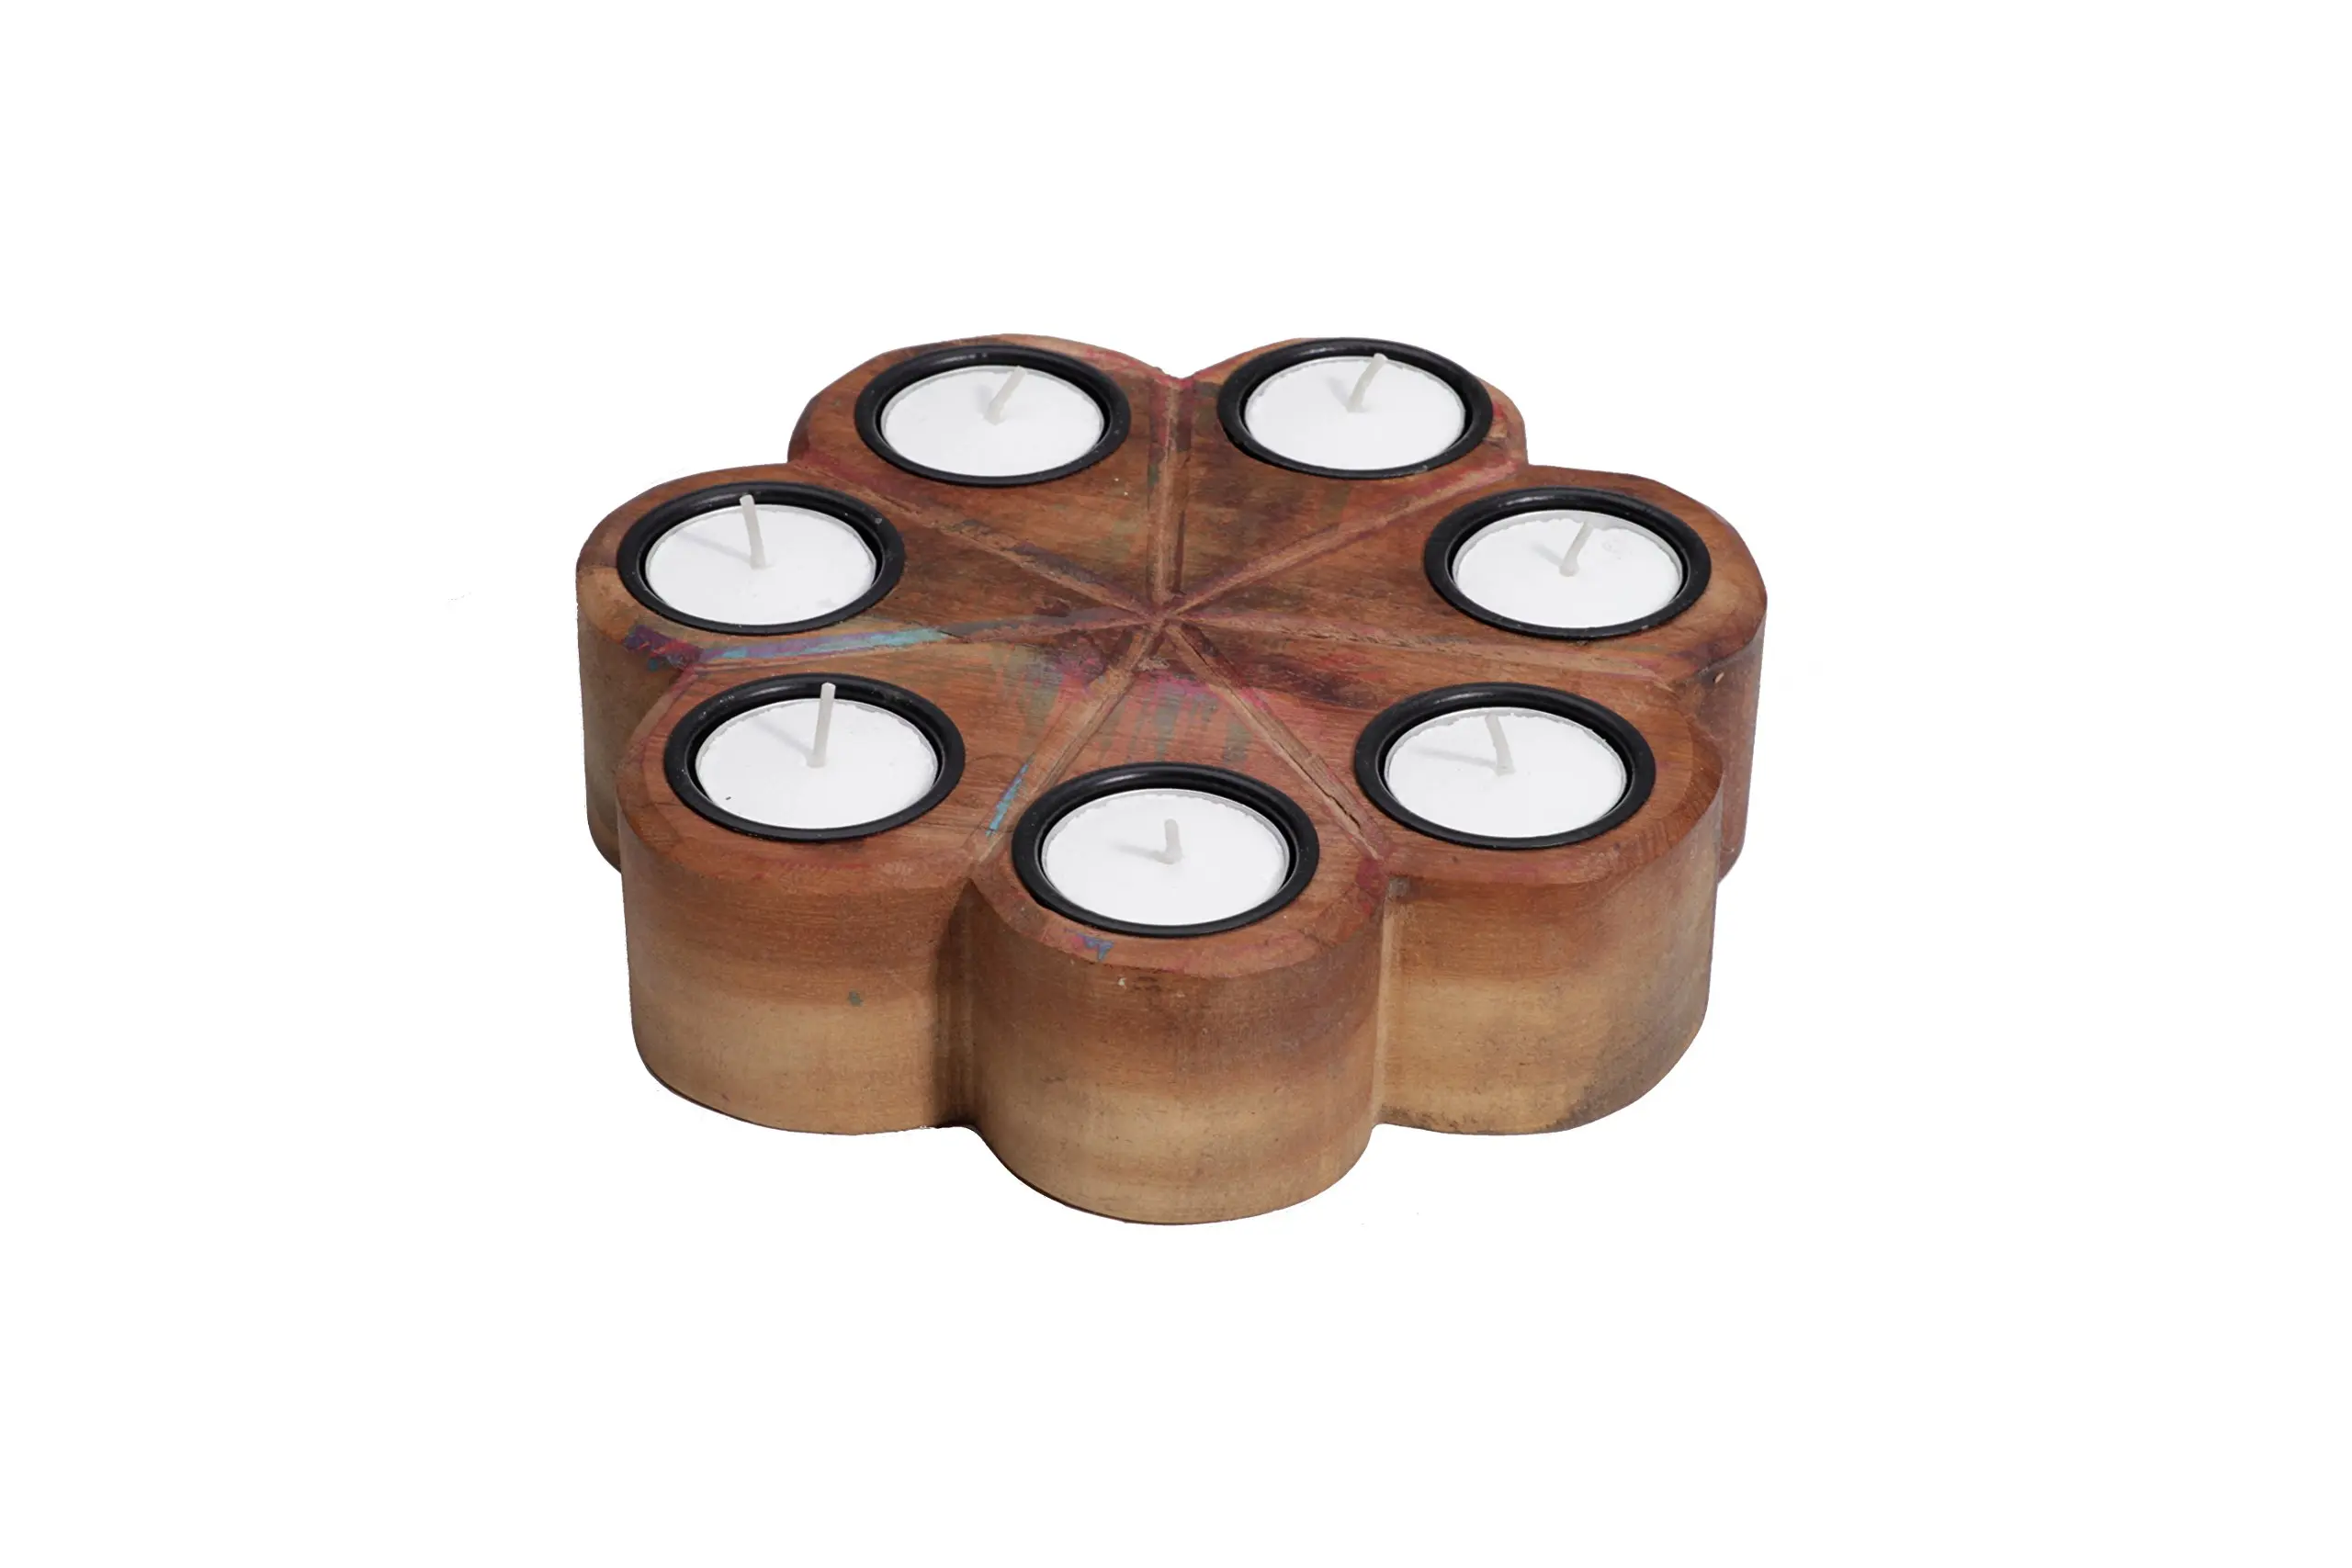 Buy Tealight Candle Holder - 7 Tealight Candle Holder - Reclaimed Wood